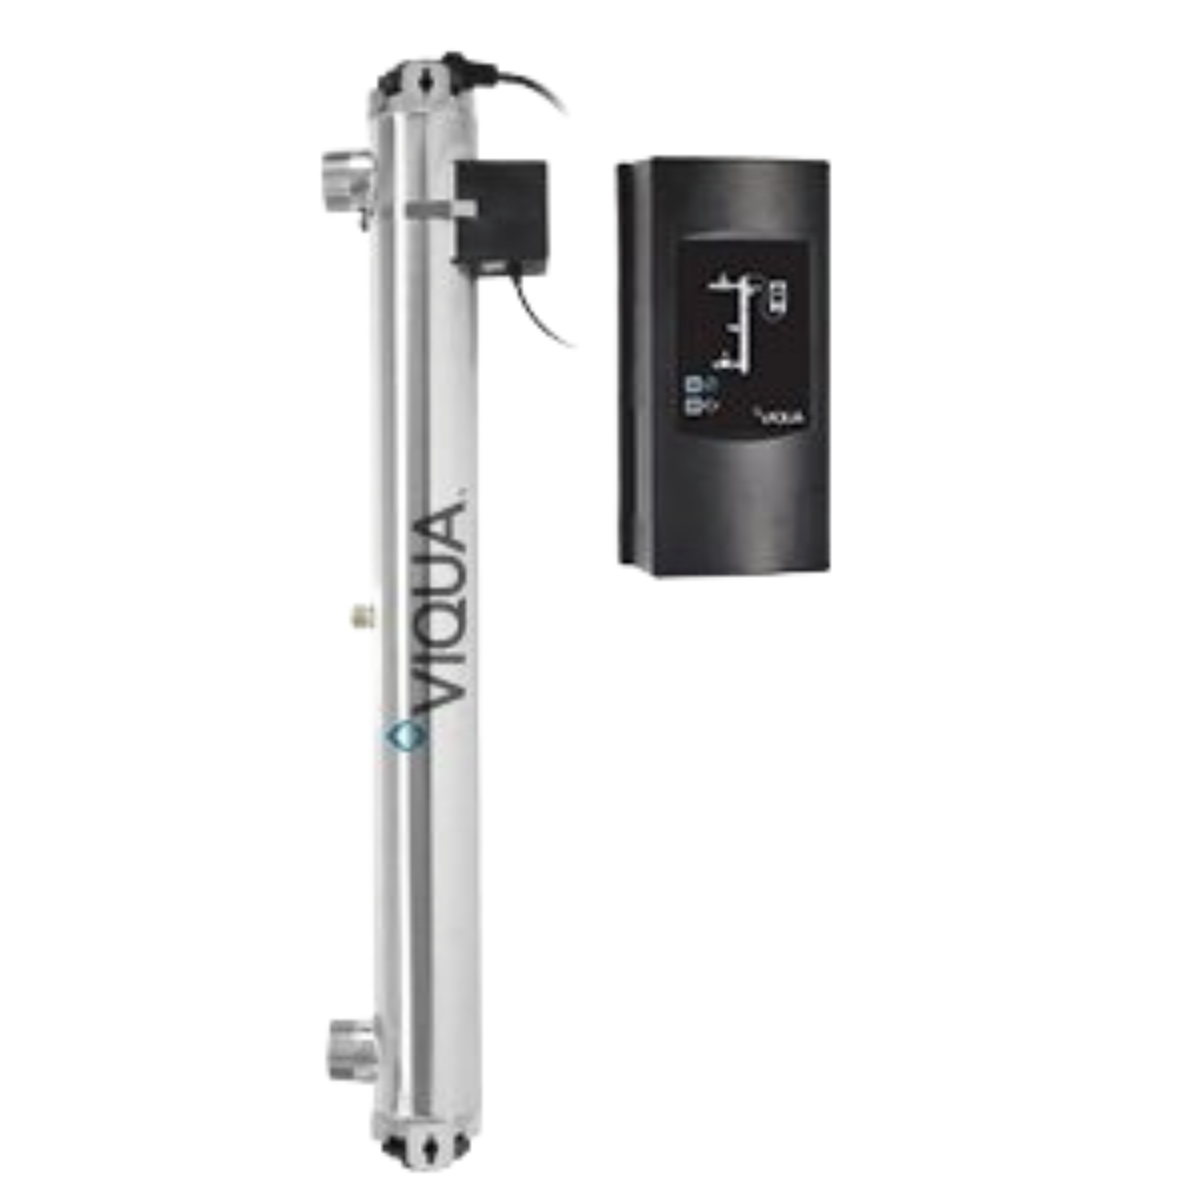 K+ Pro UV Water Disinfection System